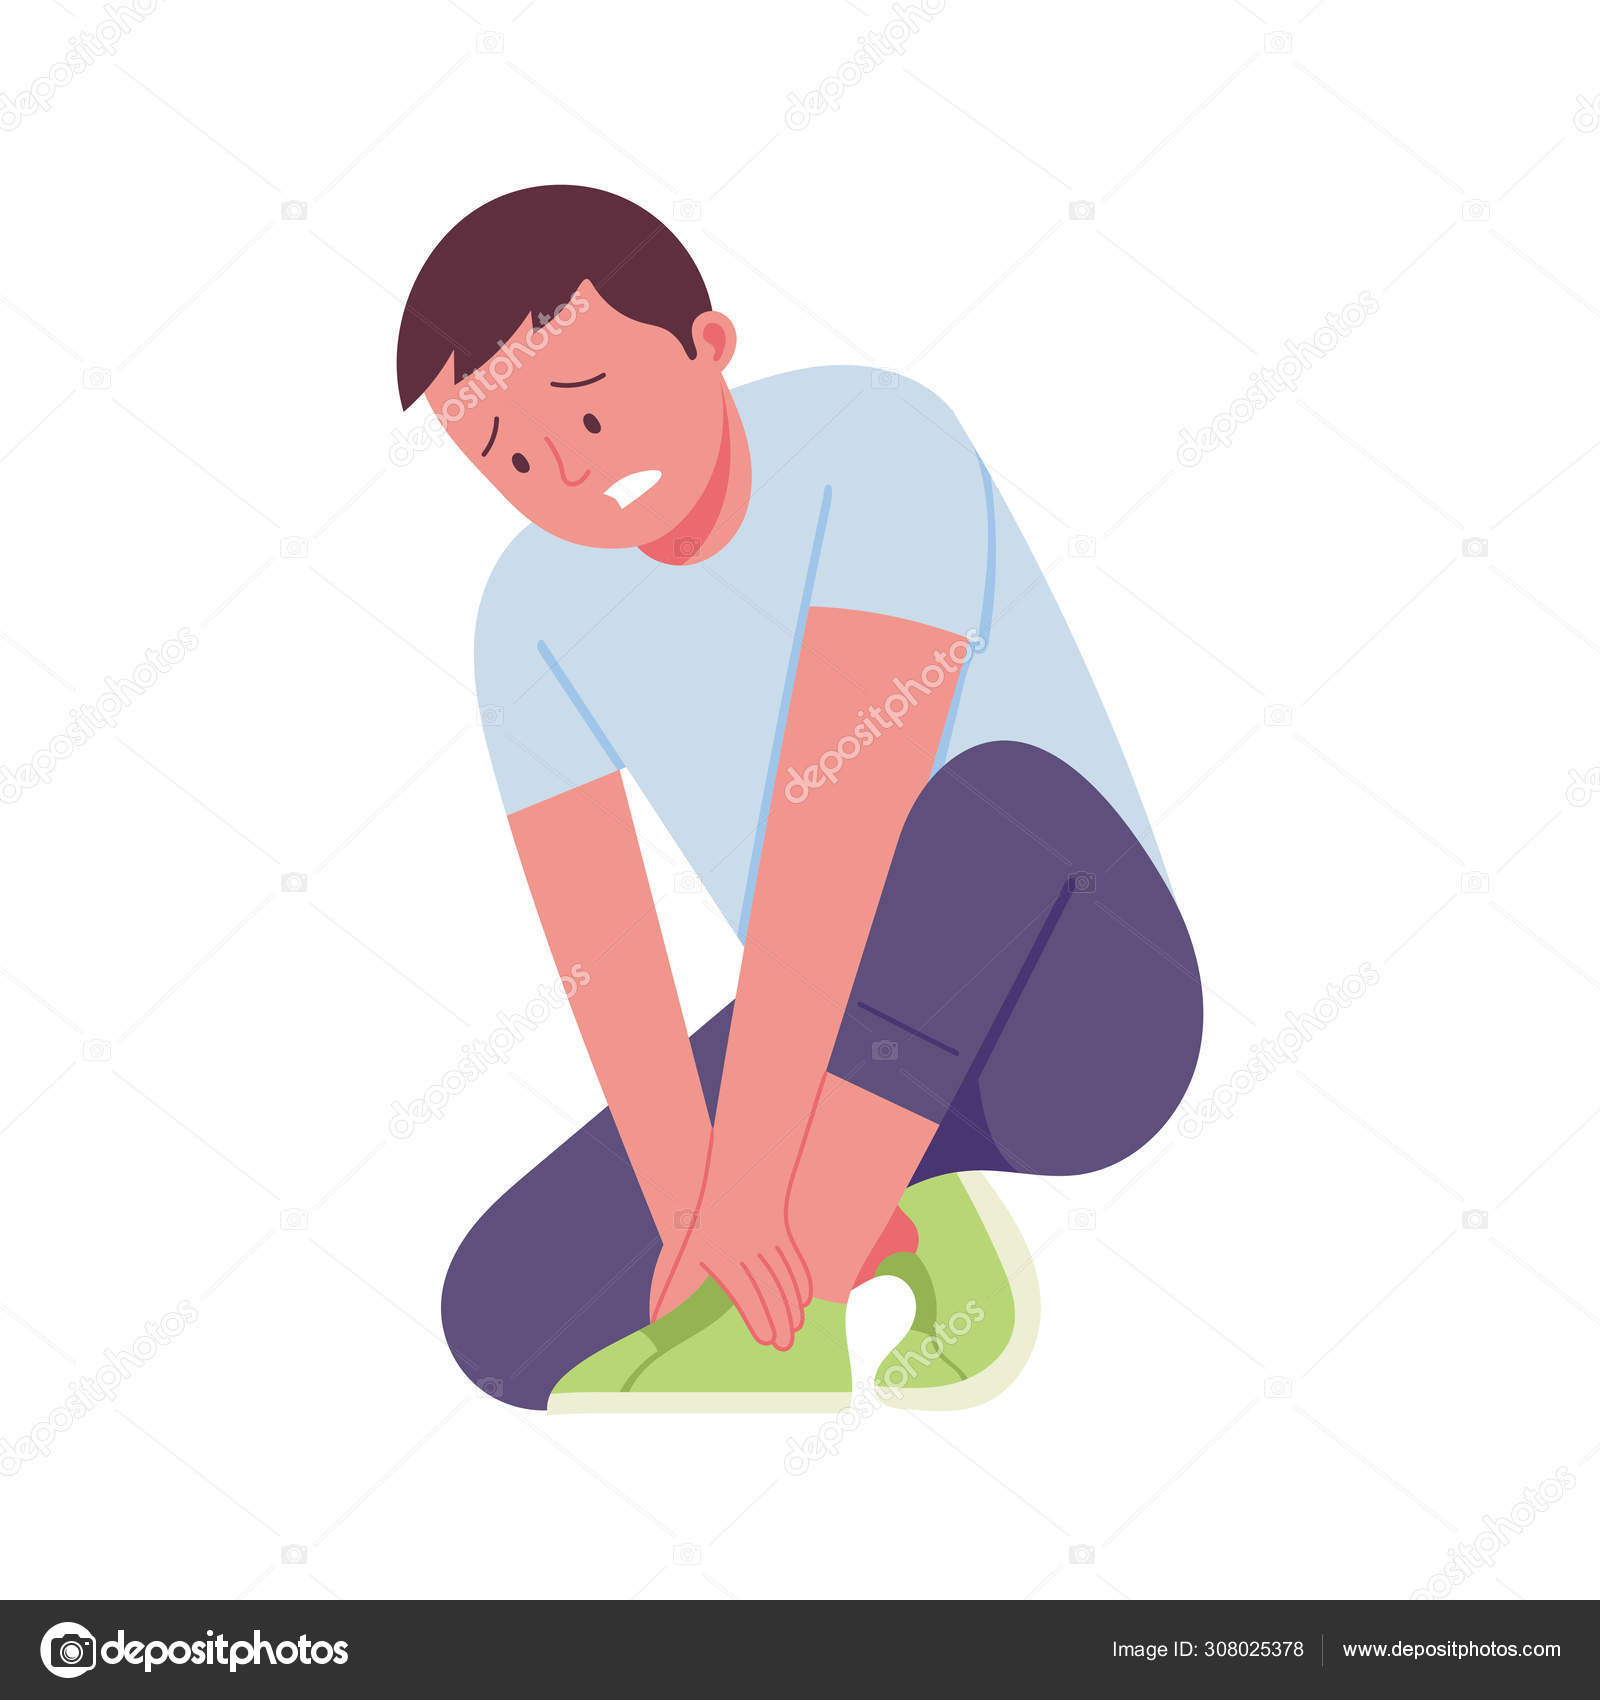 Sprained ankle Vector Art Stock Images | Depositphotos